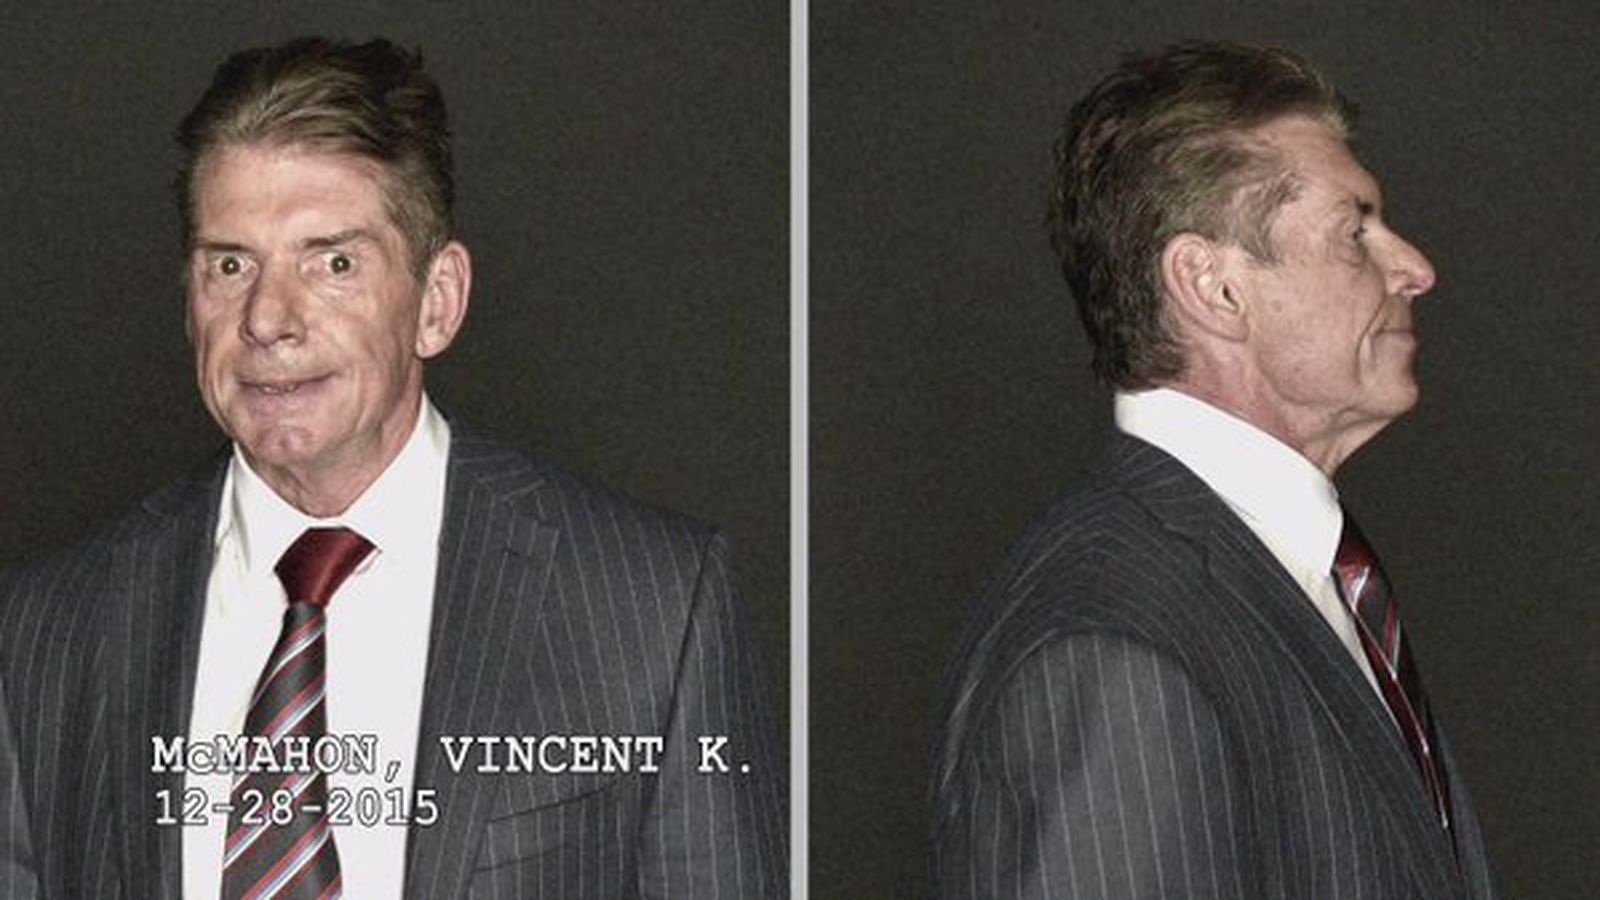 Here are some hilarious mugshots of Vince McMahon